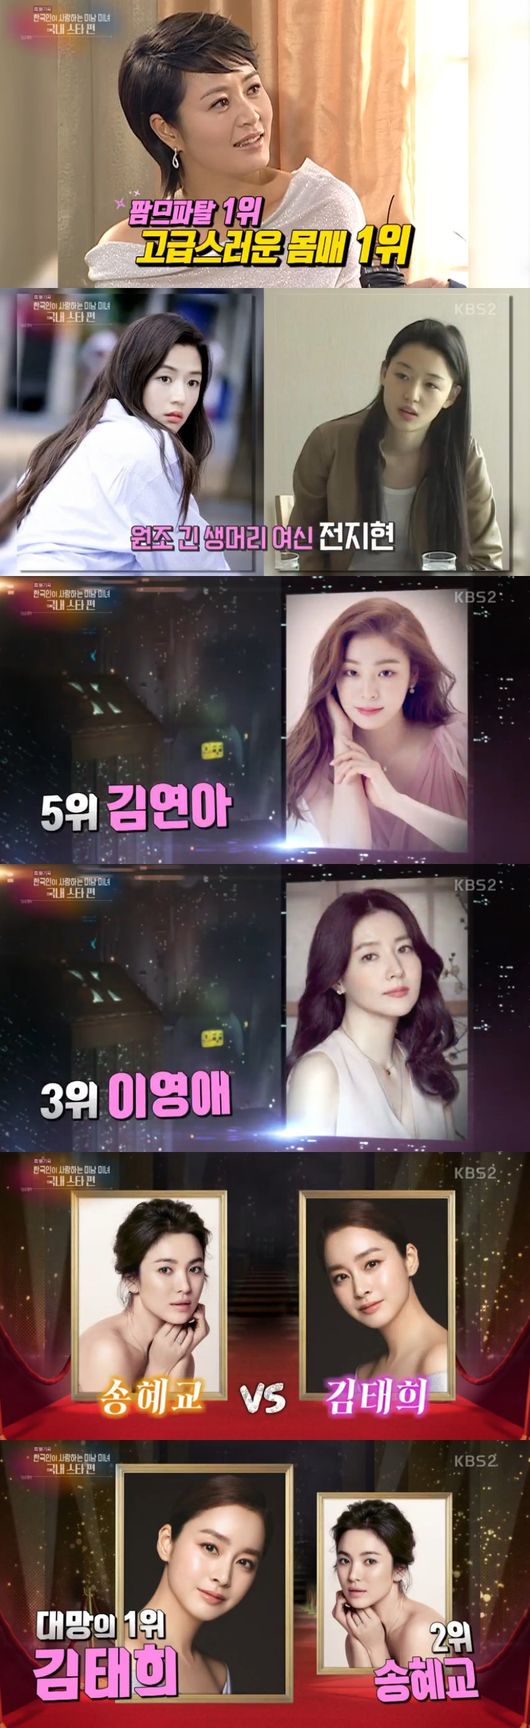 <p>Kim Tae-hee occupied the national treasure class beauty love that the Korean people love.</p><p>On the 27th, the KBS 2 TV entertainment Live Performance Street broadcast various news.</p><p>Singer Brian and Shim Eun-jin clarified the position of hard-line response against vandalism. This incident was conveyed through the SNS yesterday afternoon, puzzling the pain. Recently I conveyed my hearty feelings to the surrounding people. The affiliated office side immediately told the official position for the courtroom.</p><p>Brian said, I sent something like a parcel to a family that I can not understand even if my family likes SNS, as to the circumstances leading to complaints, While it is a bit dangerous that such things will come to the house, ᇂ, F. If you make a mistake, you tried to forgive me, but I do not want you to know the reasons for this poor sentence, please stop me.  Then he added, I feel stuffy, going if I go to the end, there is still no reaction, Gidelli said. Next, he told the fans Get a lot of future activities, look forward to the way power is generated.</p><p>Shim Eun-jin also announced that he received a complaint against vandalism. It is clear that the position to respond strongly to vandalism via SNS was clarified. As both of them foretold powerful court correspondence, the progress on progress will be noticed as to the situation.</p><p>Star chef Yi Chang, who is under suspicion of drugs, was sentenced to suspended execution. Because drug sucking received suspicion of smuggling last December. Sent to Ichango in the Netherlands Drugs were in the parcel. The psychiatrist said, In moment there is temporary support for people with depression, I will suffer a great harm in the long term and There is no doctor prescribing it. Yetchao is still flooded with voices of criticism.</p><p>I believed to have the encounter with the genius of face-to-face combo chungmuro. Kang Dong-won, Jung Woo-sung, Gim Myeol, Lee Min-ho, Han Hyo Ju, who is the protagonist of the movie Wolf Wolf appeared. Super luxury casting became a topic of Changan. Kang Dong Won said, I was delighted with the Jun Woo-sung brothers joining news. Jung Woo - sung asked, It is natural, but it is a general gift set and laughing was held when asking that it fills a gathering of facial geniuses. Especially Kang Dong Won said that Visual Jung Woo-sung brother is at the top of the visual and laughed as I am second showing a visual vertical relationship.</p><p>Next, I talked about Handsome rankings loved by Koreans. If Kang Dong Won is the second place and Jung Woo-sung fourth place, Jung Woo-sung said wrong, but Kang Dong Won said I am satisfied accordingly, and the light and dark are divided and smiling embraced It was. Then Jung Woo-sung, who is ranked No. 1 as Jang Dong-gun and third place as Won Bin, said, I do not mind, he laughed a nail and laughed again.</p><p>Meanwhile, a beautiful domestic star actress loved by Koreans was released. Ko So Yeon, 13th Koh Hyun Jung, 12th Fan Cine, 11th Han · Gyeong 10th Resin, 9th Son Ye Jin, 8th Jeong Yun Hee, 7th Kim Hye Su, 7th Kim Hye Su, 6th Chon · Ji Hyun, fifth place Kim Yuna first entry, Teen star 4th in the 90s, Kim Hee Sunon, 3rd place Lee Yeong-ae, 2nd place is Song Hye-kyo, long-awaited first place is Kim Tae-hee.</p>